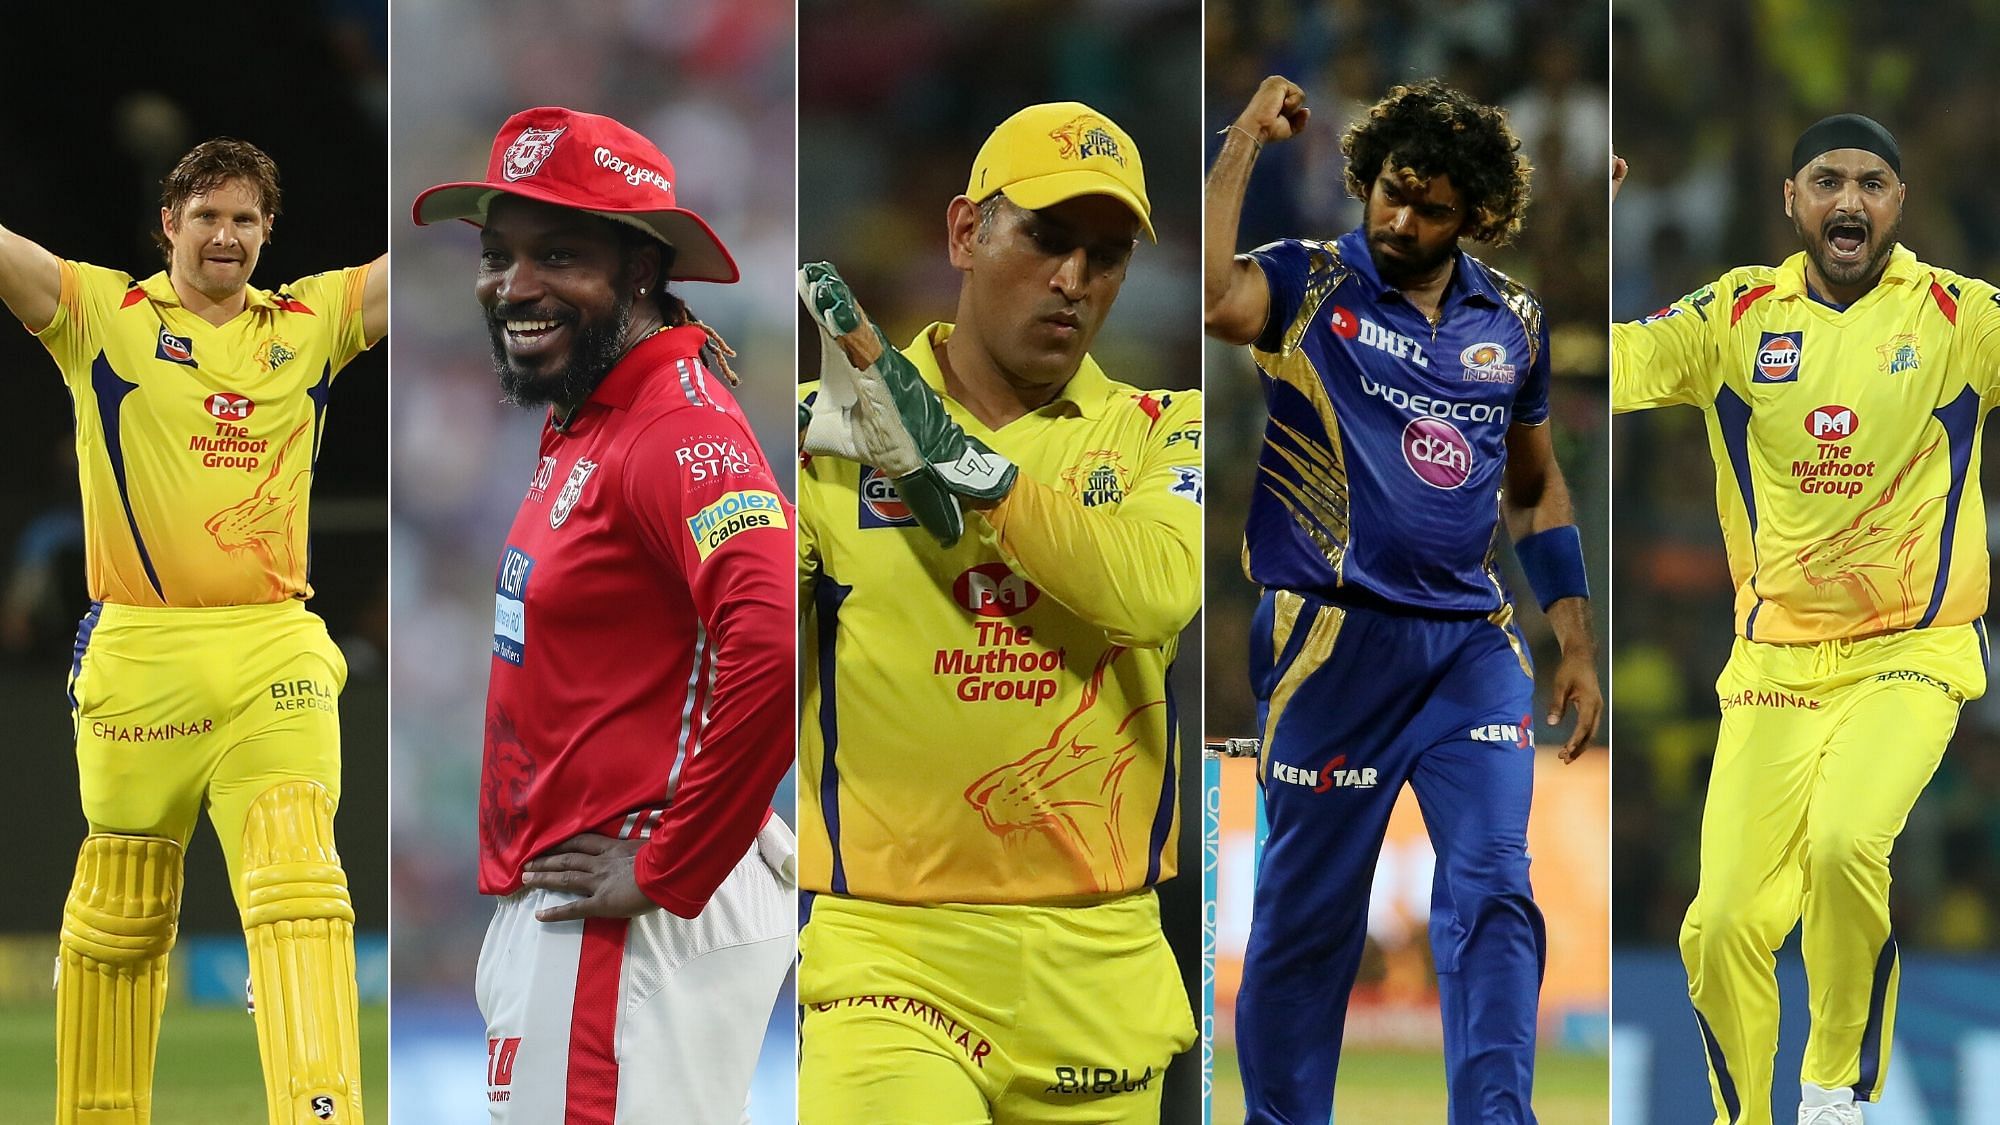 Upcoming IPL could be the last one for some of these players. There are chances that a few of these legends may call it quits and leave us with everlasting memories.